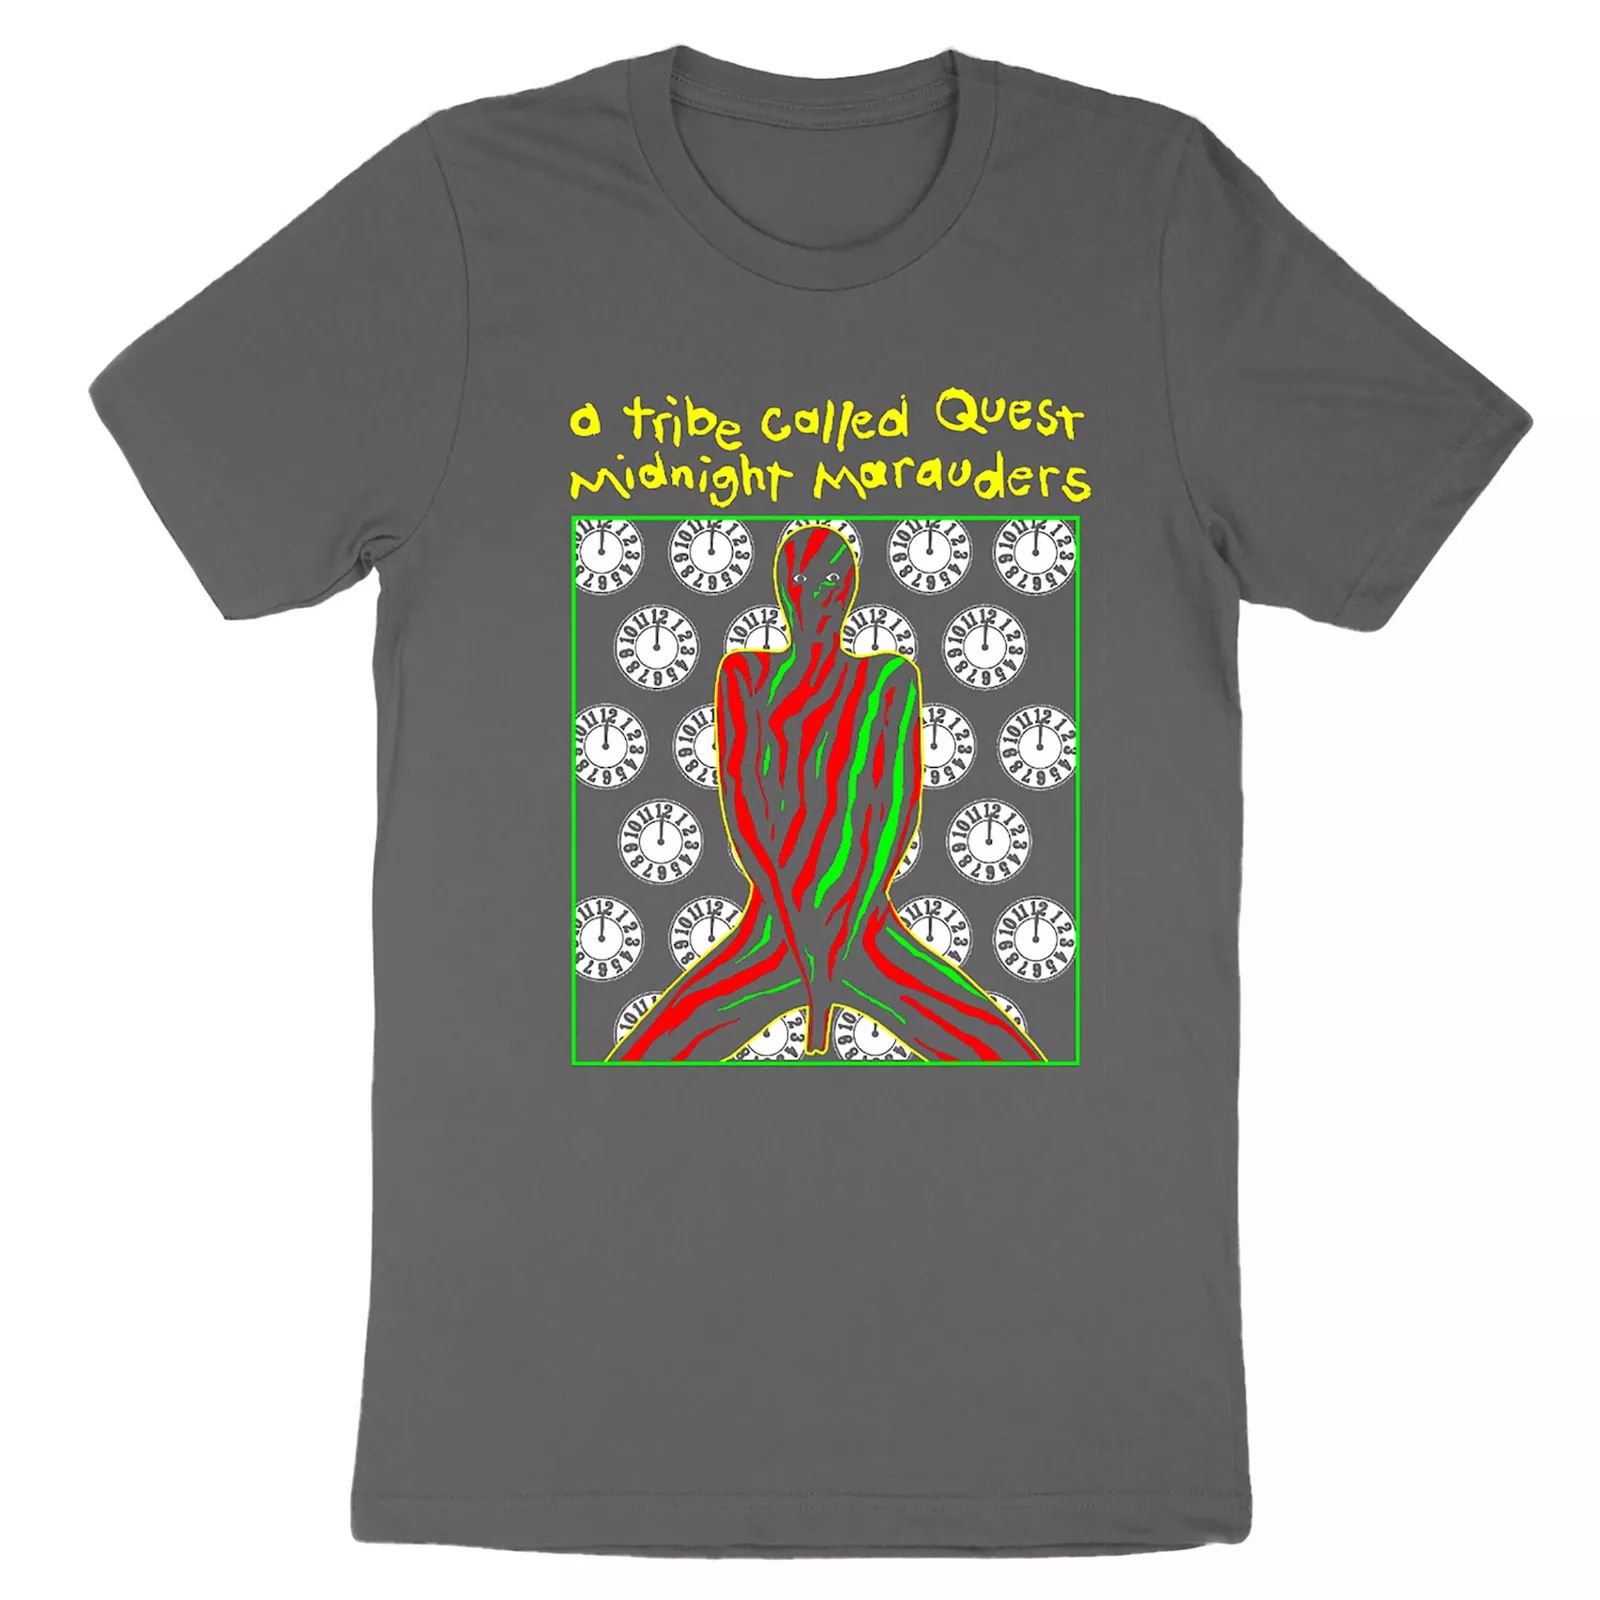 Men's A Tribe Called Quest Midnight Marauders Tee, Size: Large, Grey | Kohl's